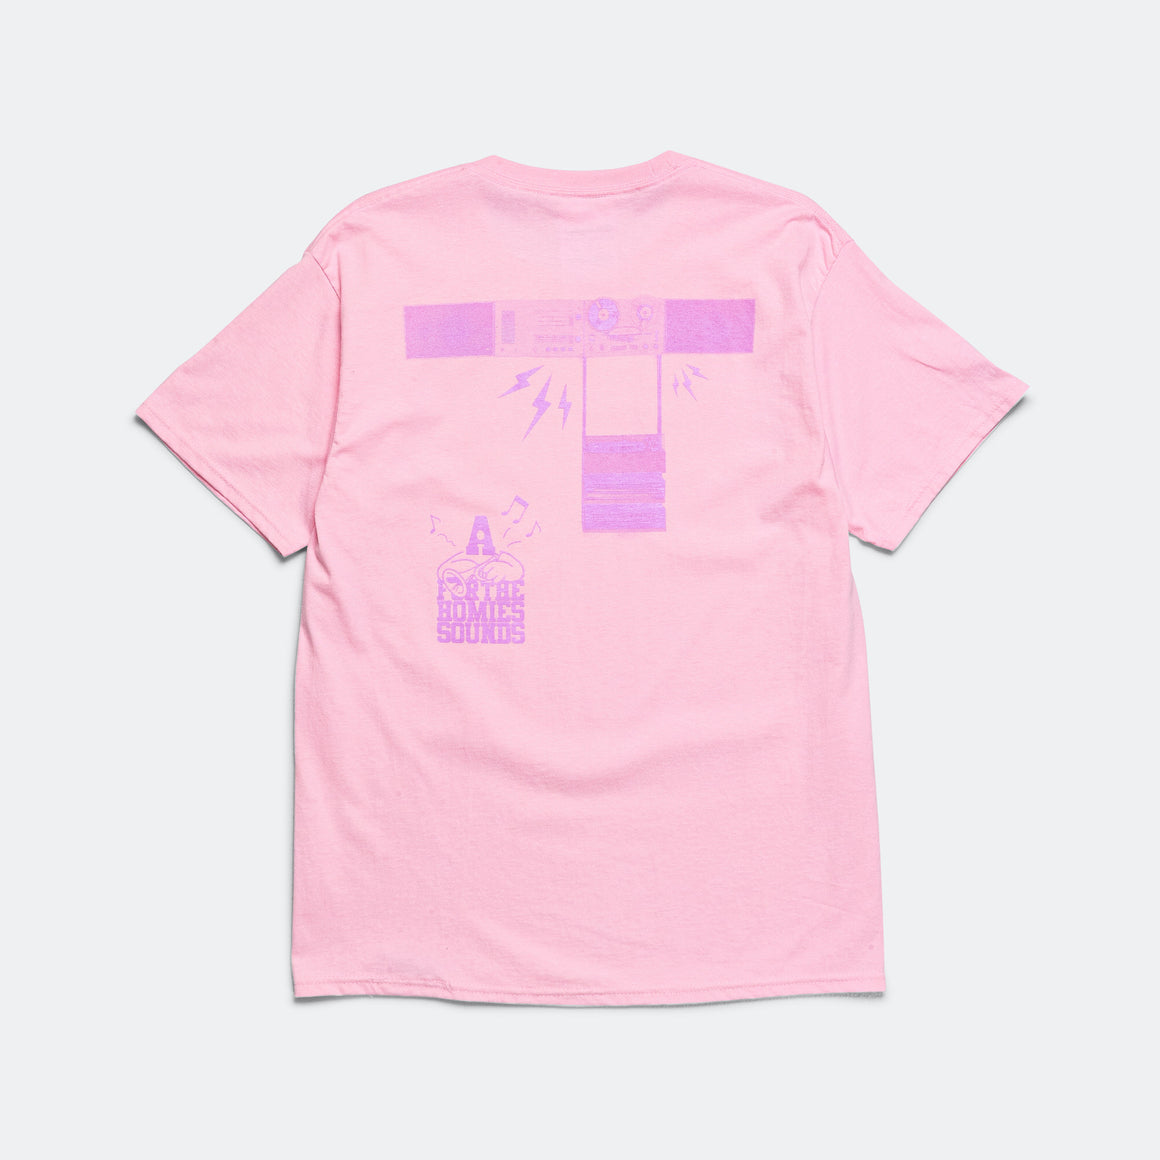 For The Homies - SOUND SYSTEM T-Shirt - Pink - UP THERE